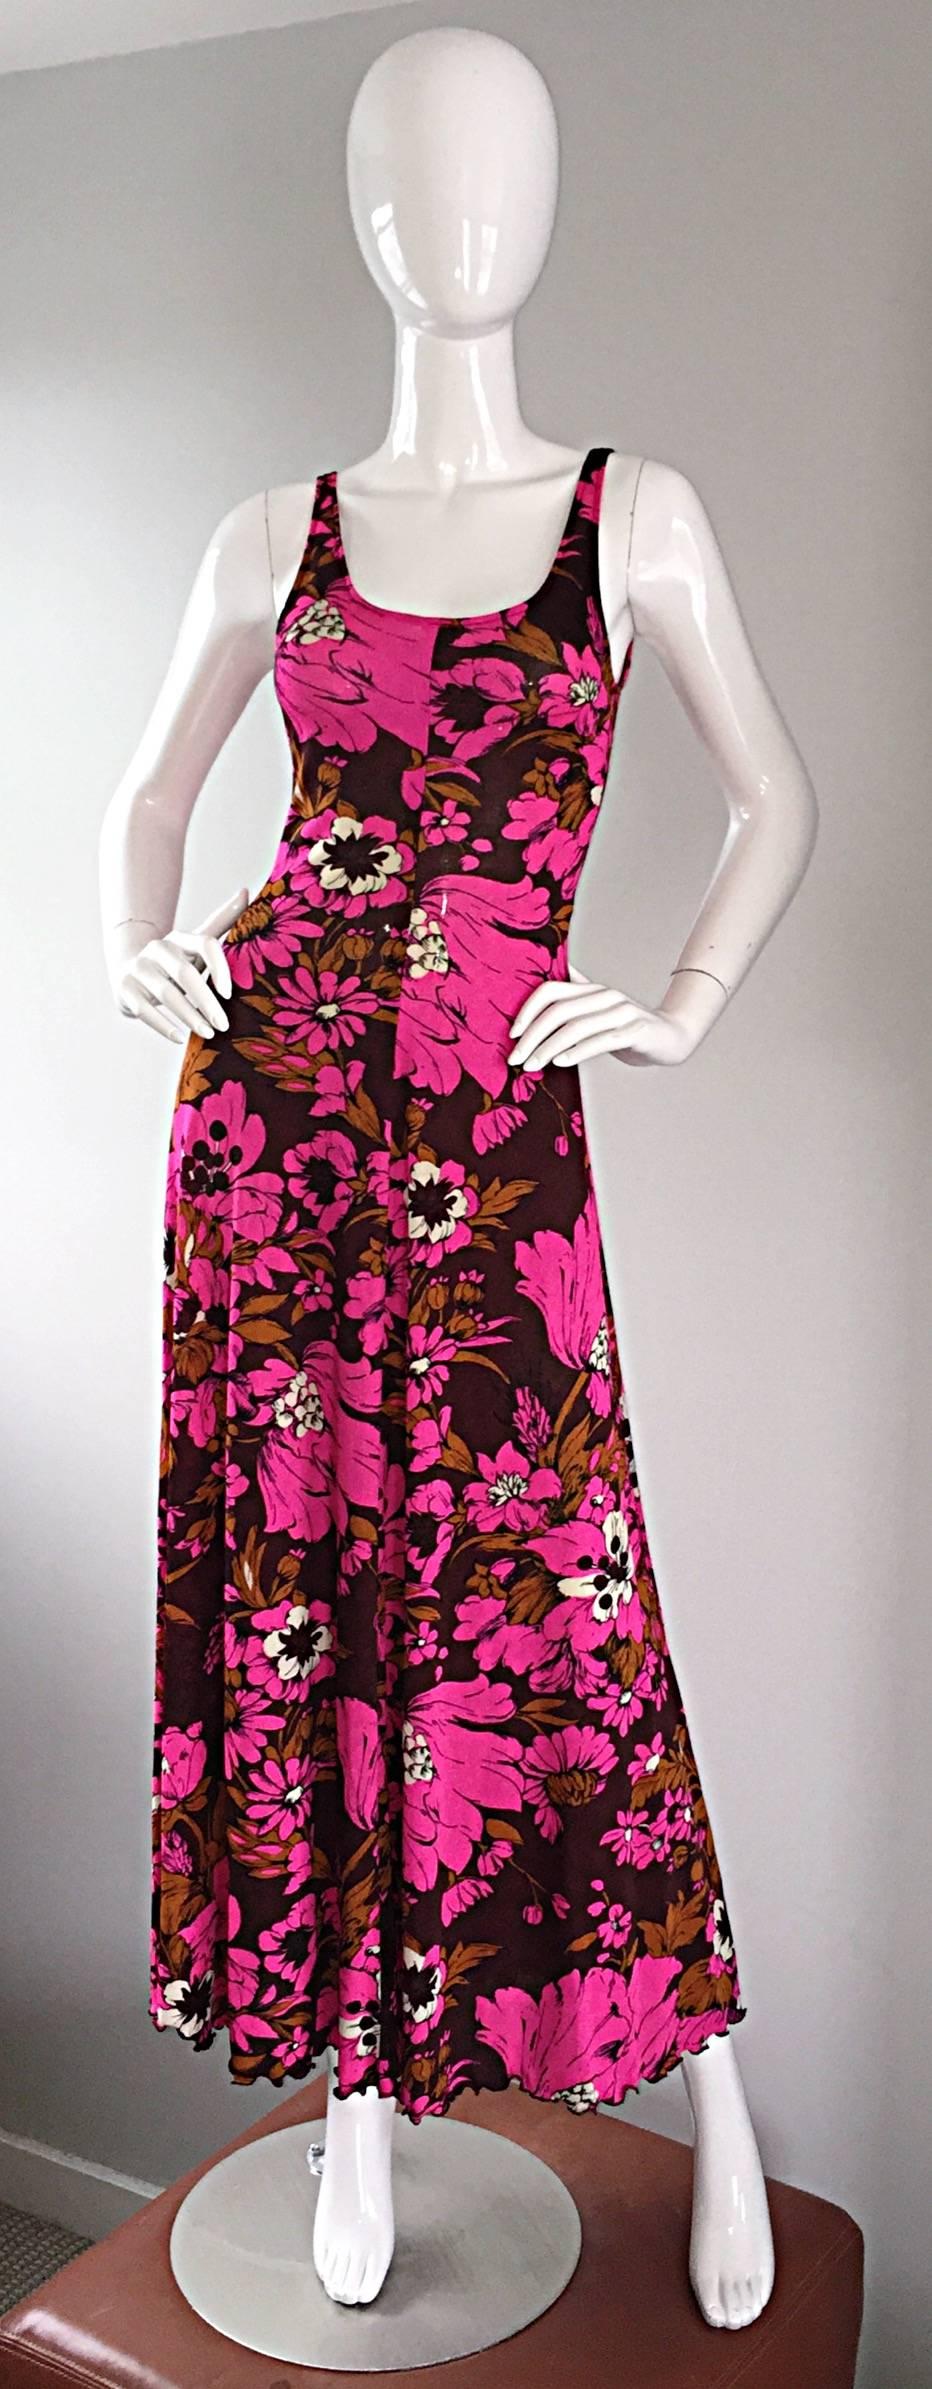 Amazing vintage MICHAEL DAYAN, for TAPE MEASURE, 70s jersey maxi dress! Hard to find, and coveted label! Slinky fit, with an intriguing floral print! Bright pink (fuchsia), and browns throughout. Tank style, with a flattering fit, and timeless